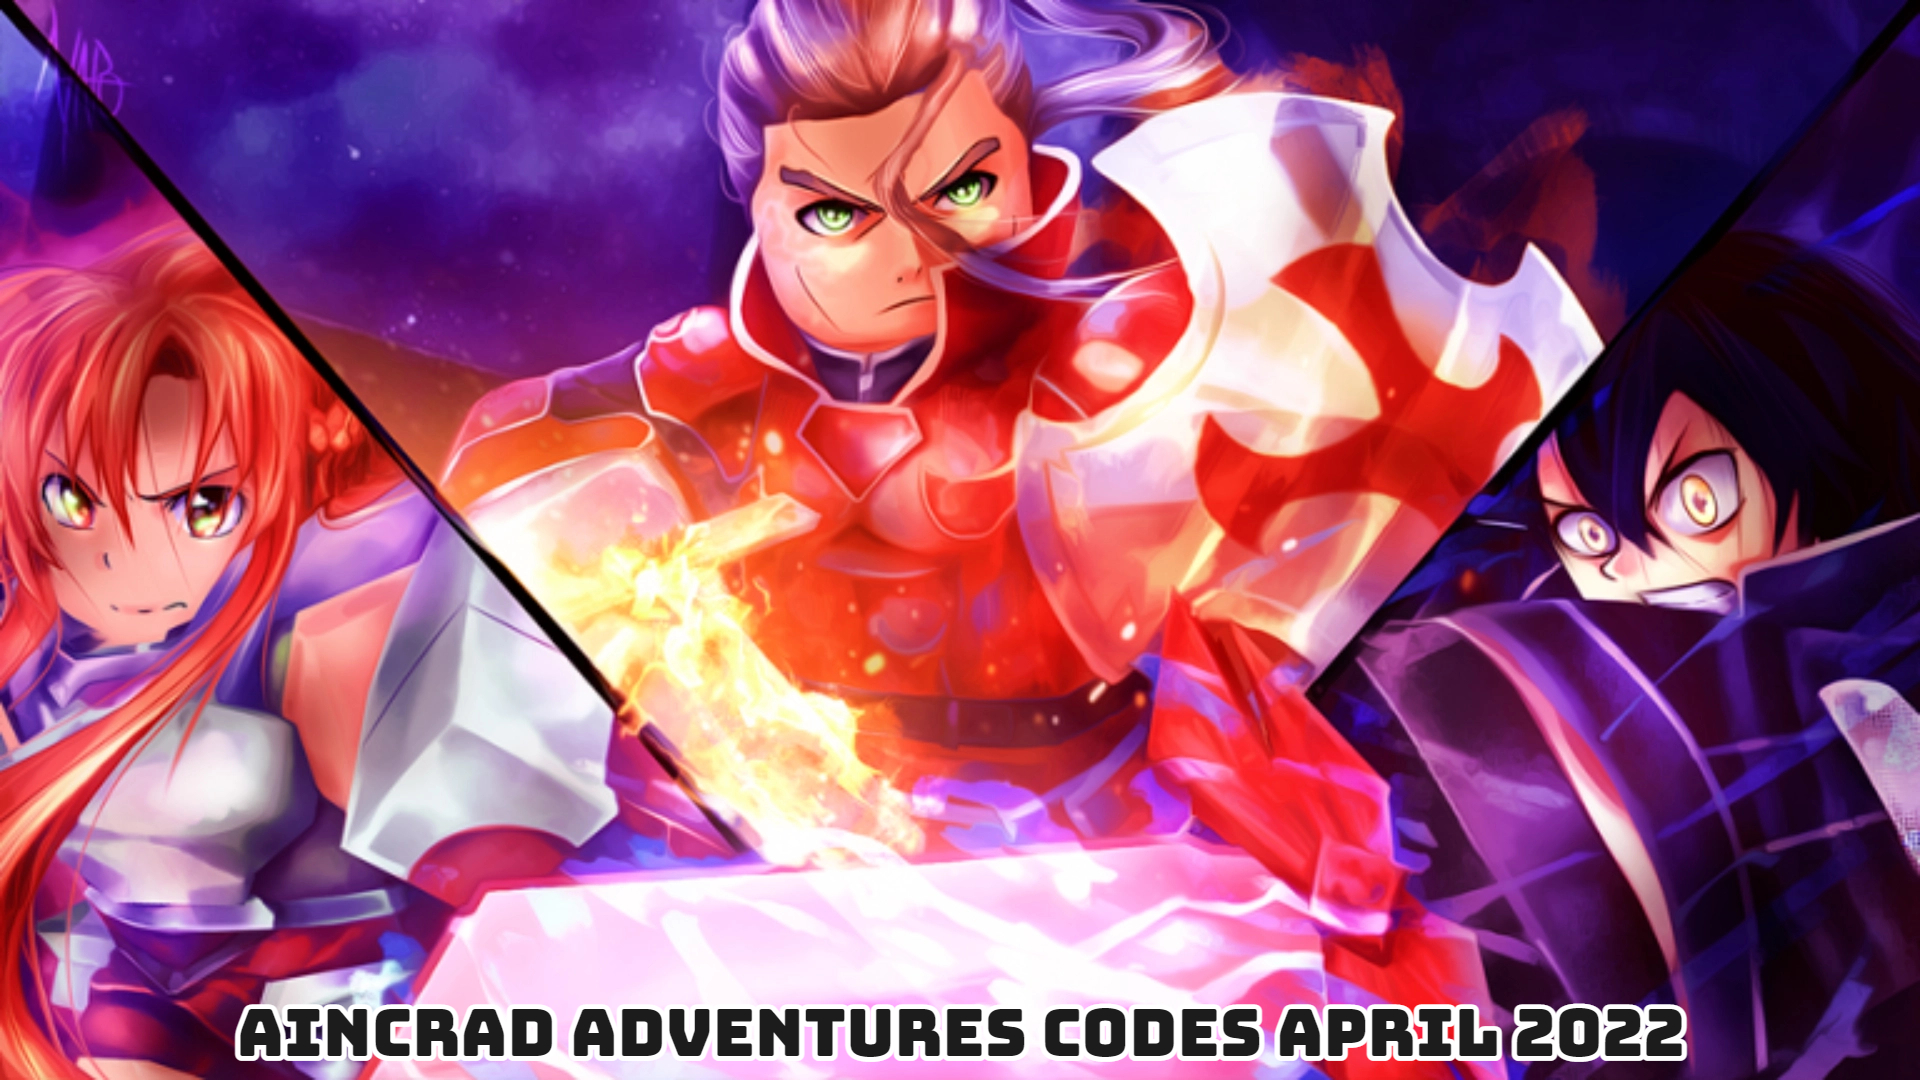 You are currently viewing Aincrad Adventures Codes Today 19 April 2022